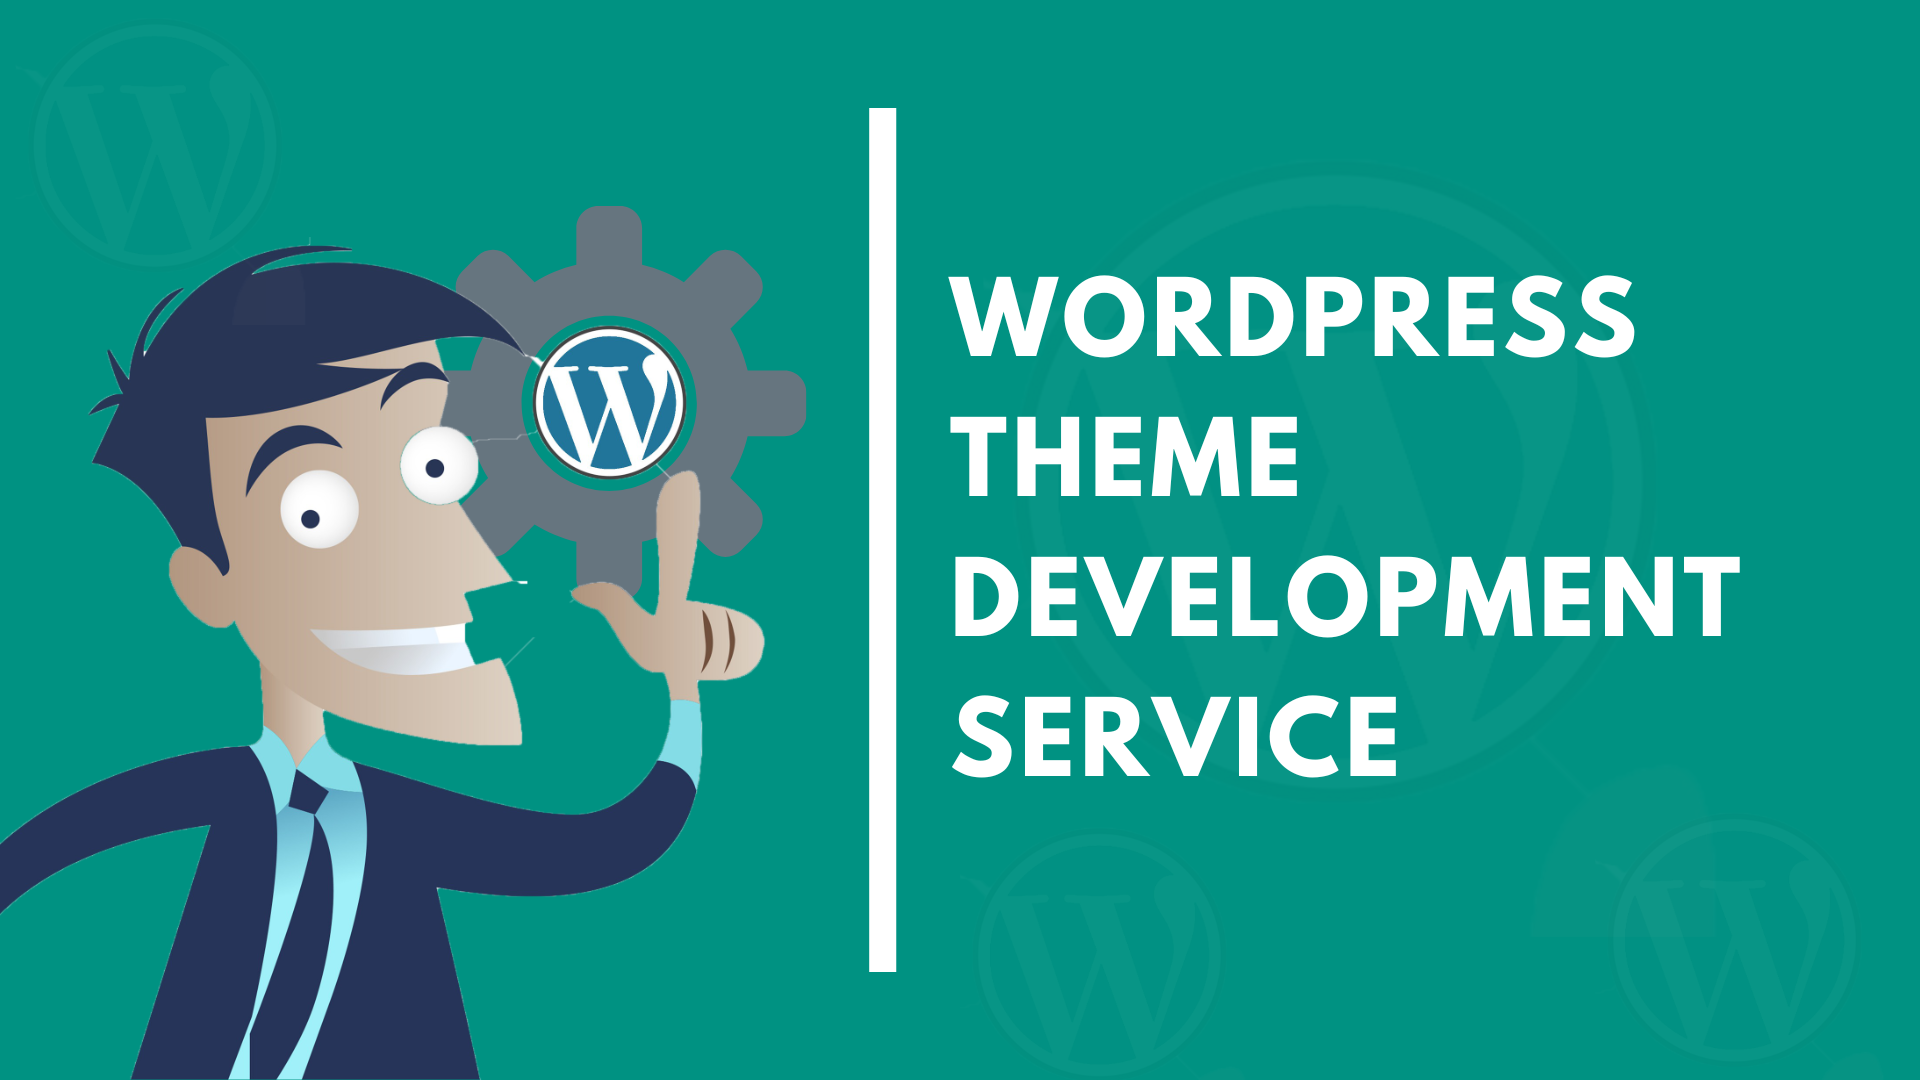 Are you looking for WordPress Theme Development Service?